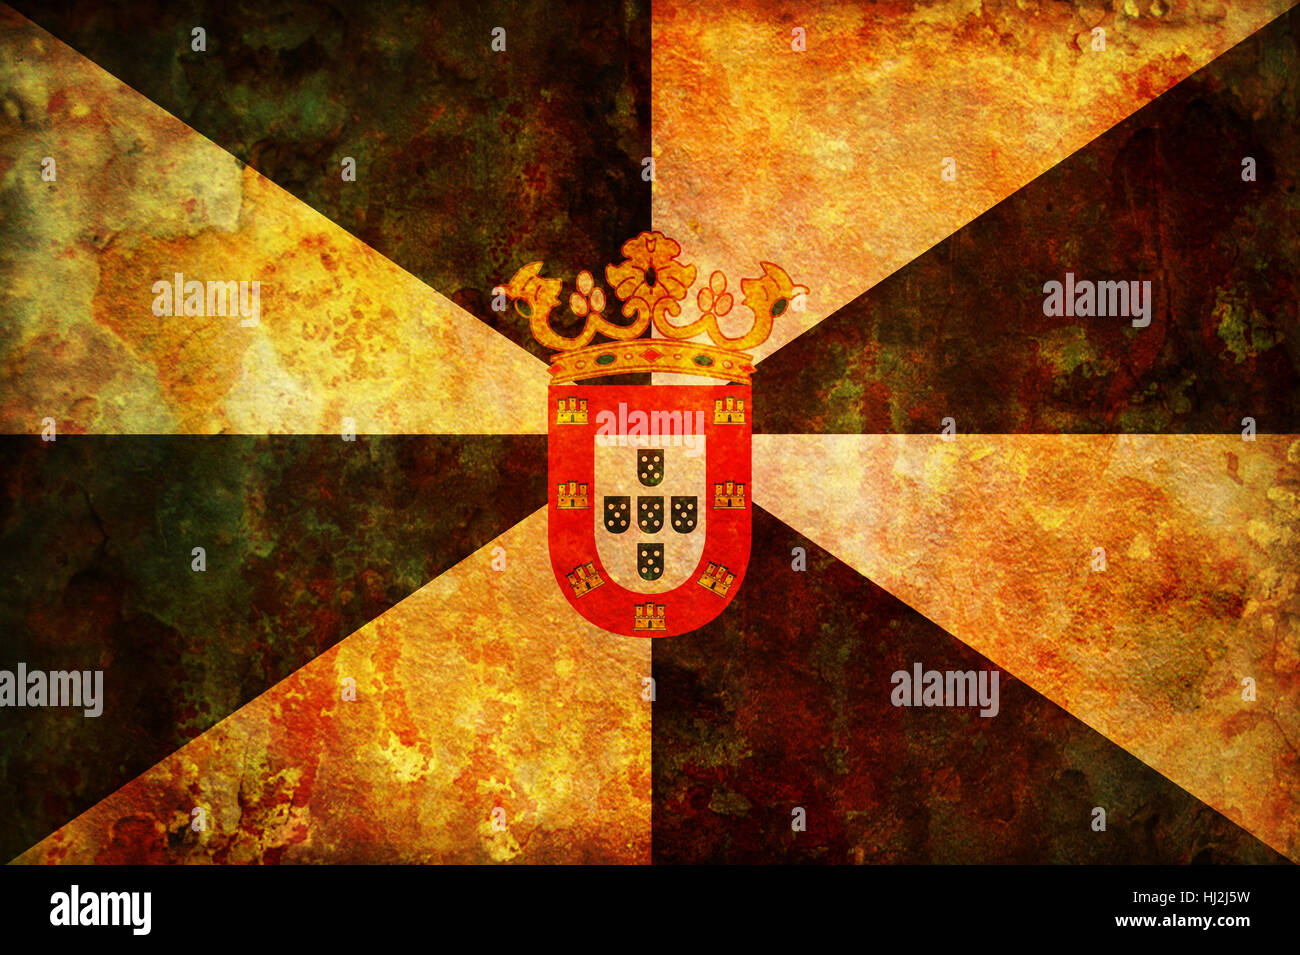 isolated, emblem, spain, vintage, illustration, flag, rusty, national, country, Stock Photo